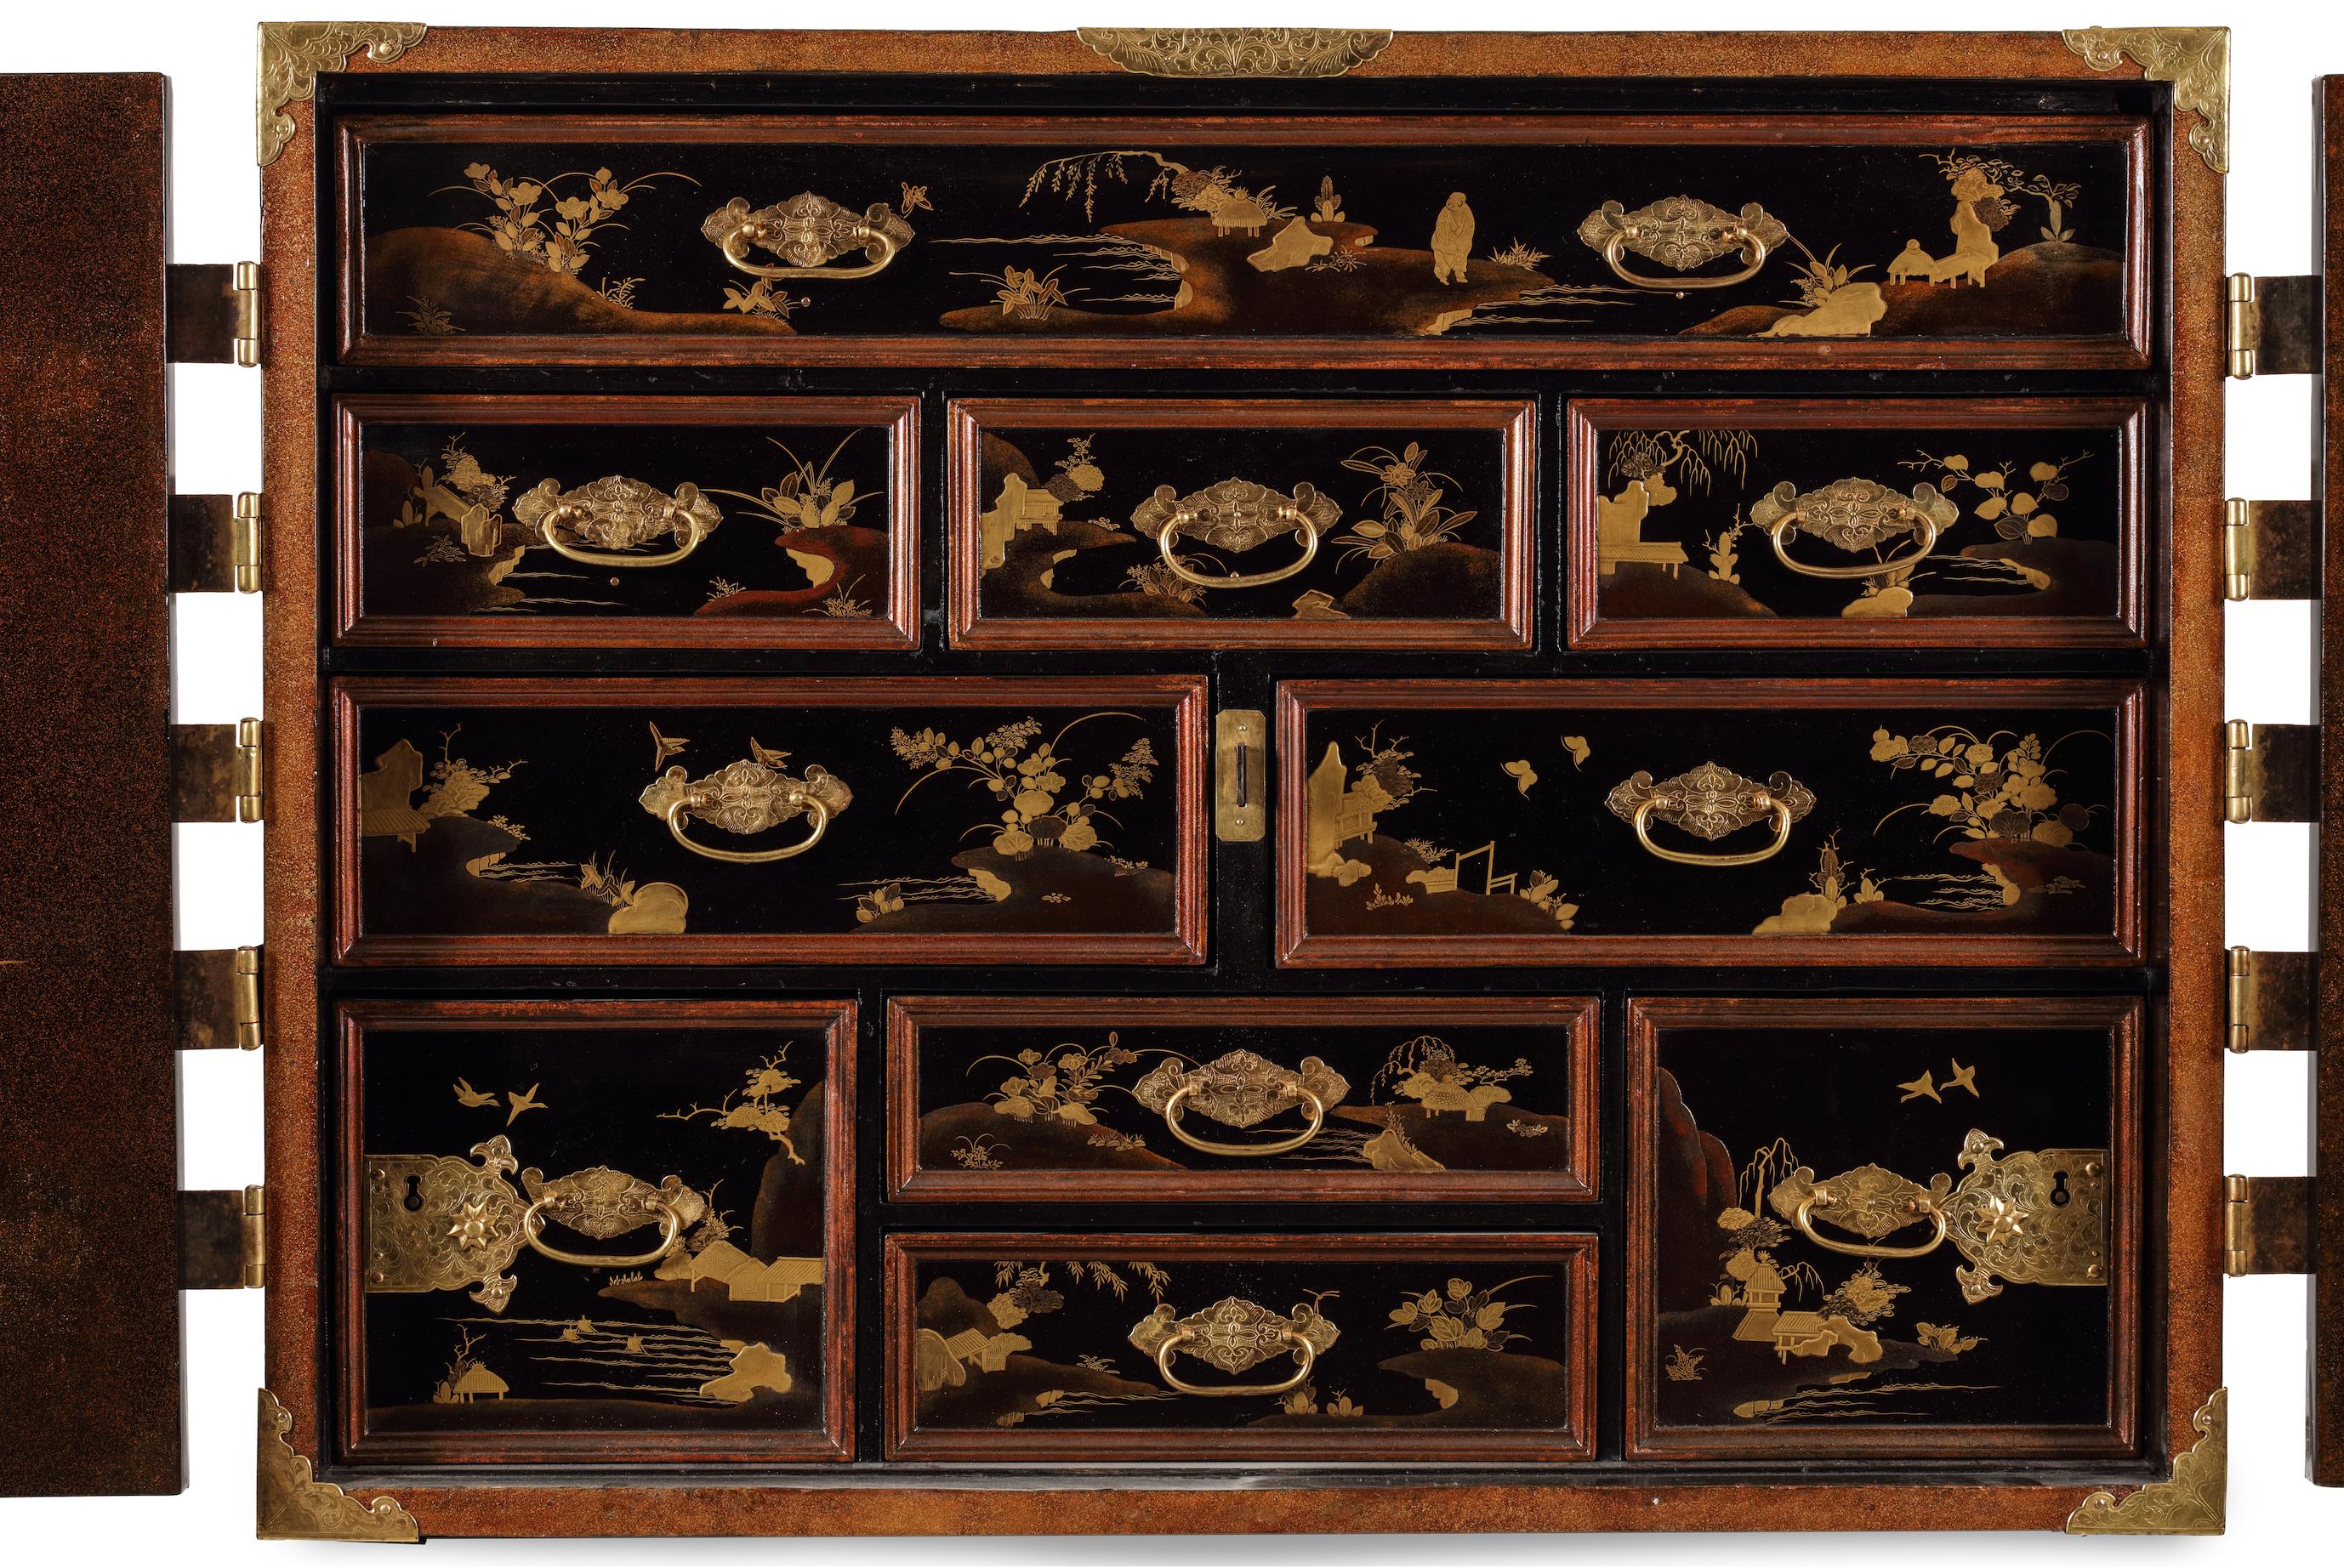 Extremely Fine and Rare 17th-Century Japanese Export Lacquer and Inlaid Cabinet  For Sale 4